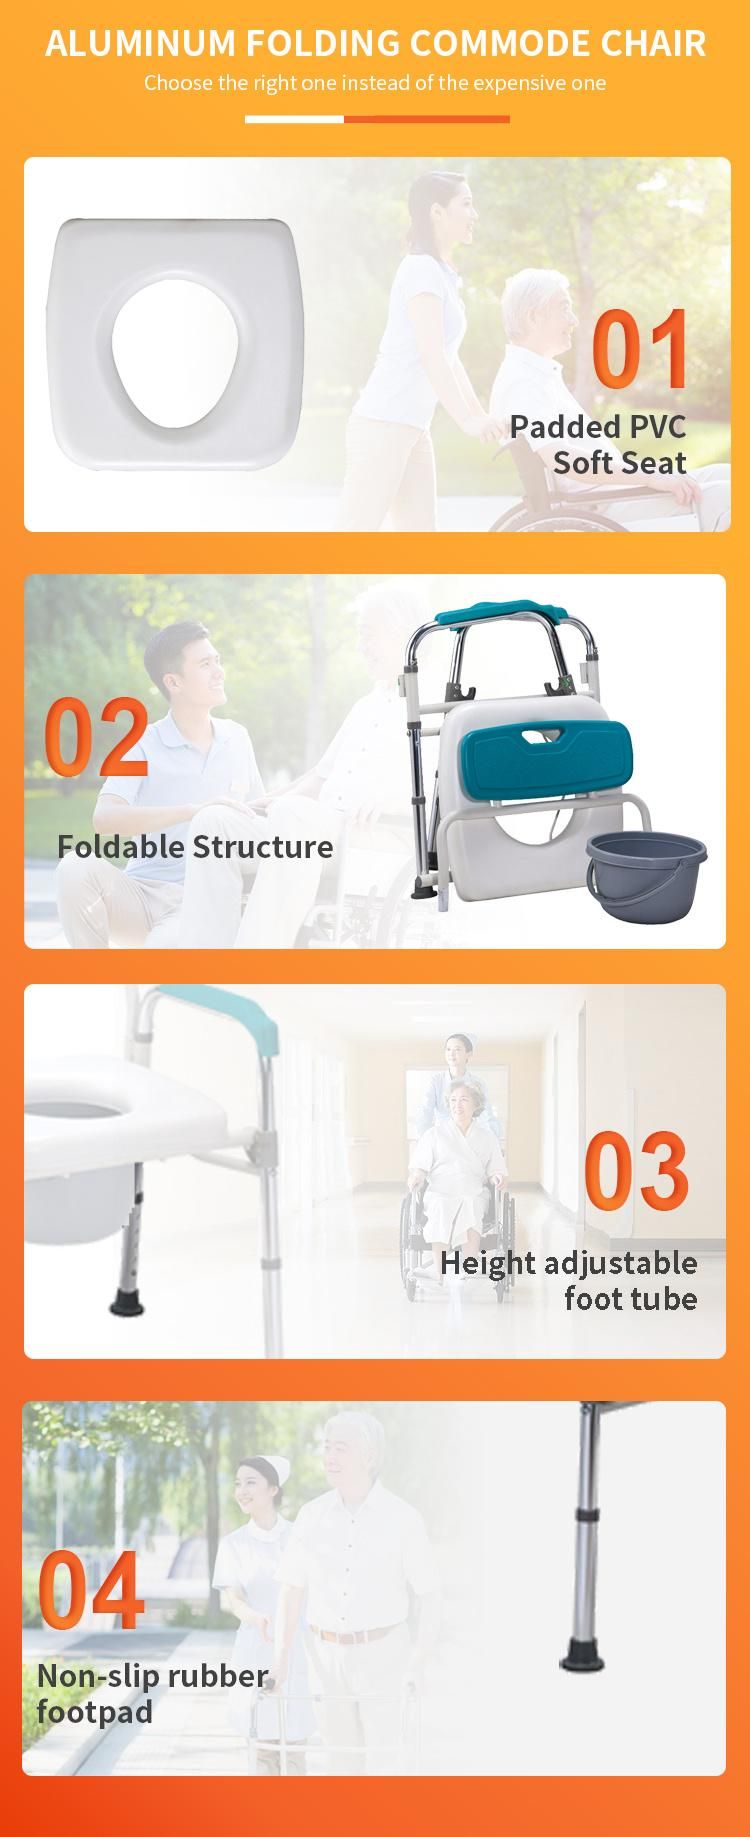 Commodechair Toilet Chair Hospital Use Foldable and Portable Commode Chair for Disable People Aluminum Commode Chair